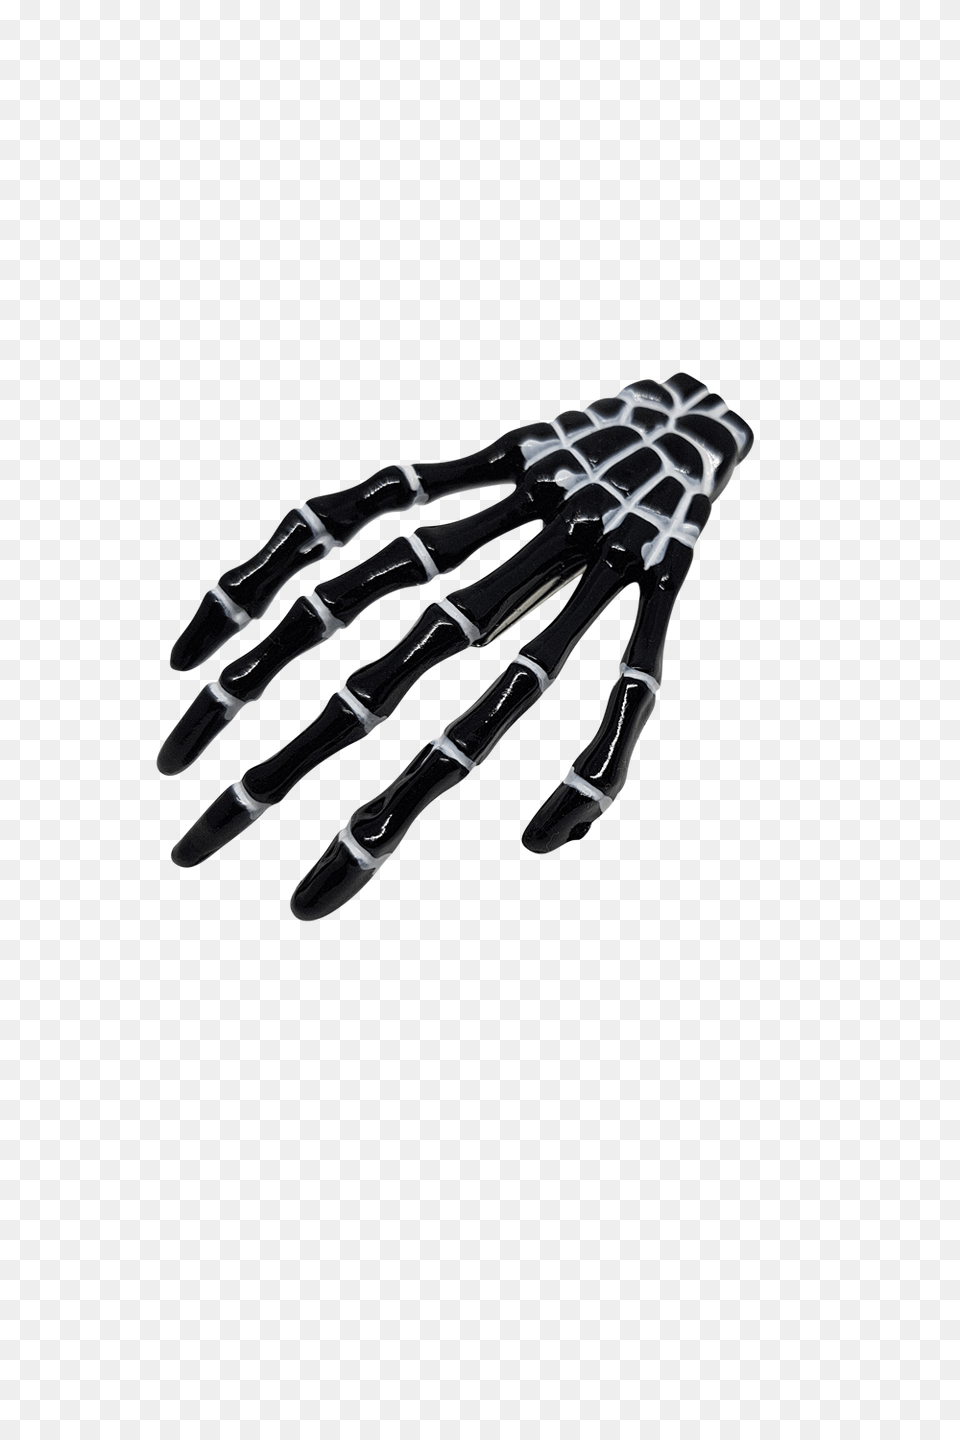 Skeleton Hand Hair Clip Odd Mountain, Hardware, Electronics, Cutlery, Fork Png